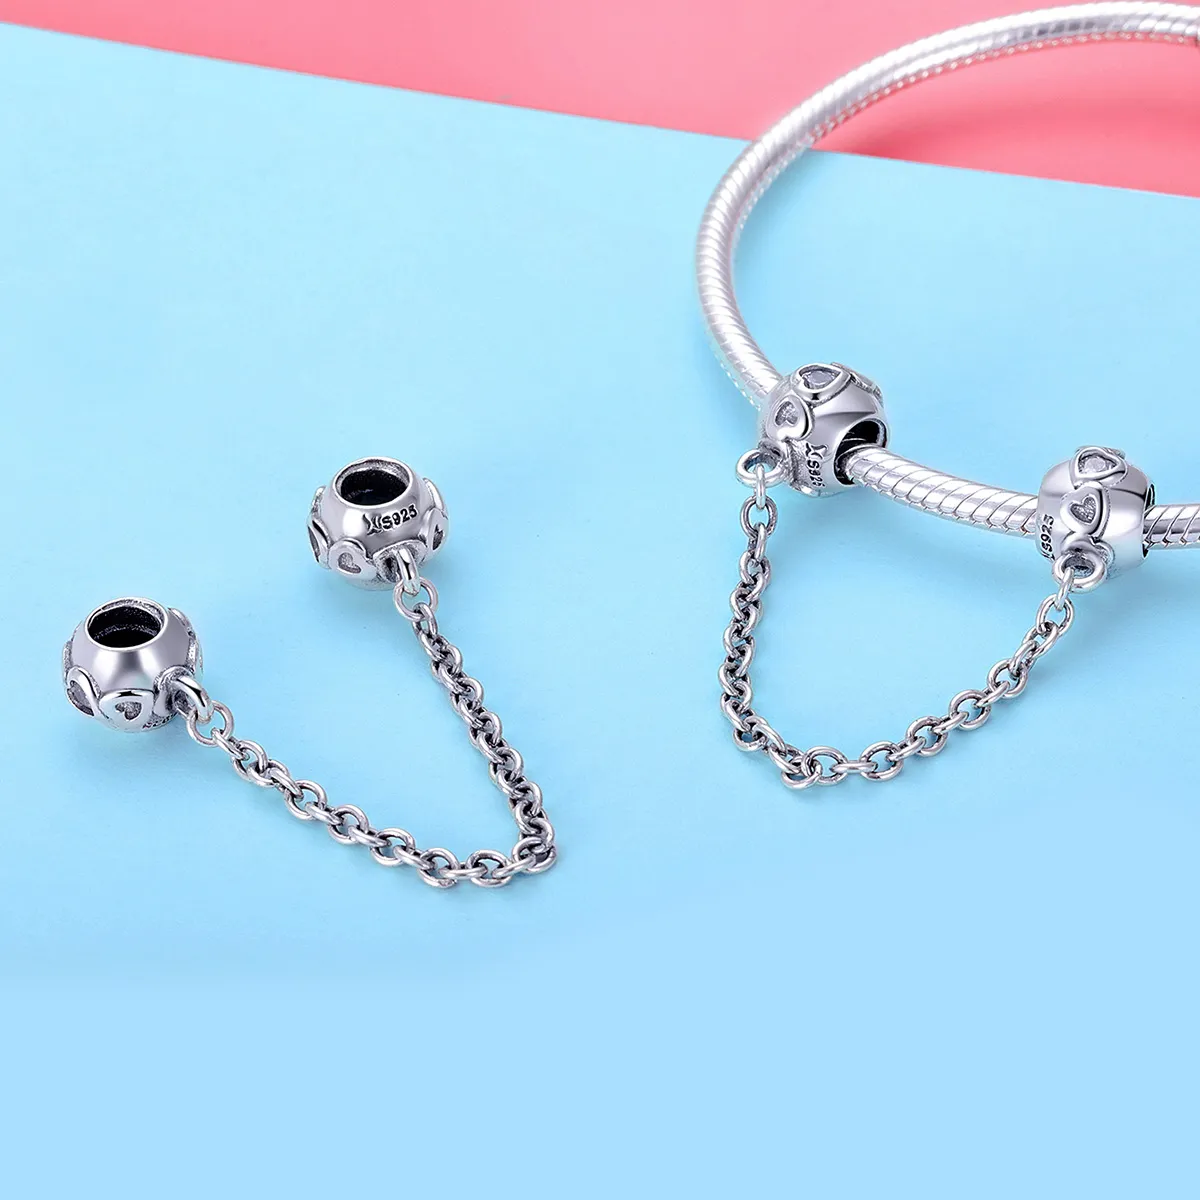 Pandora Style Silver Cute Safety Chain - SCC736